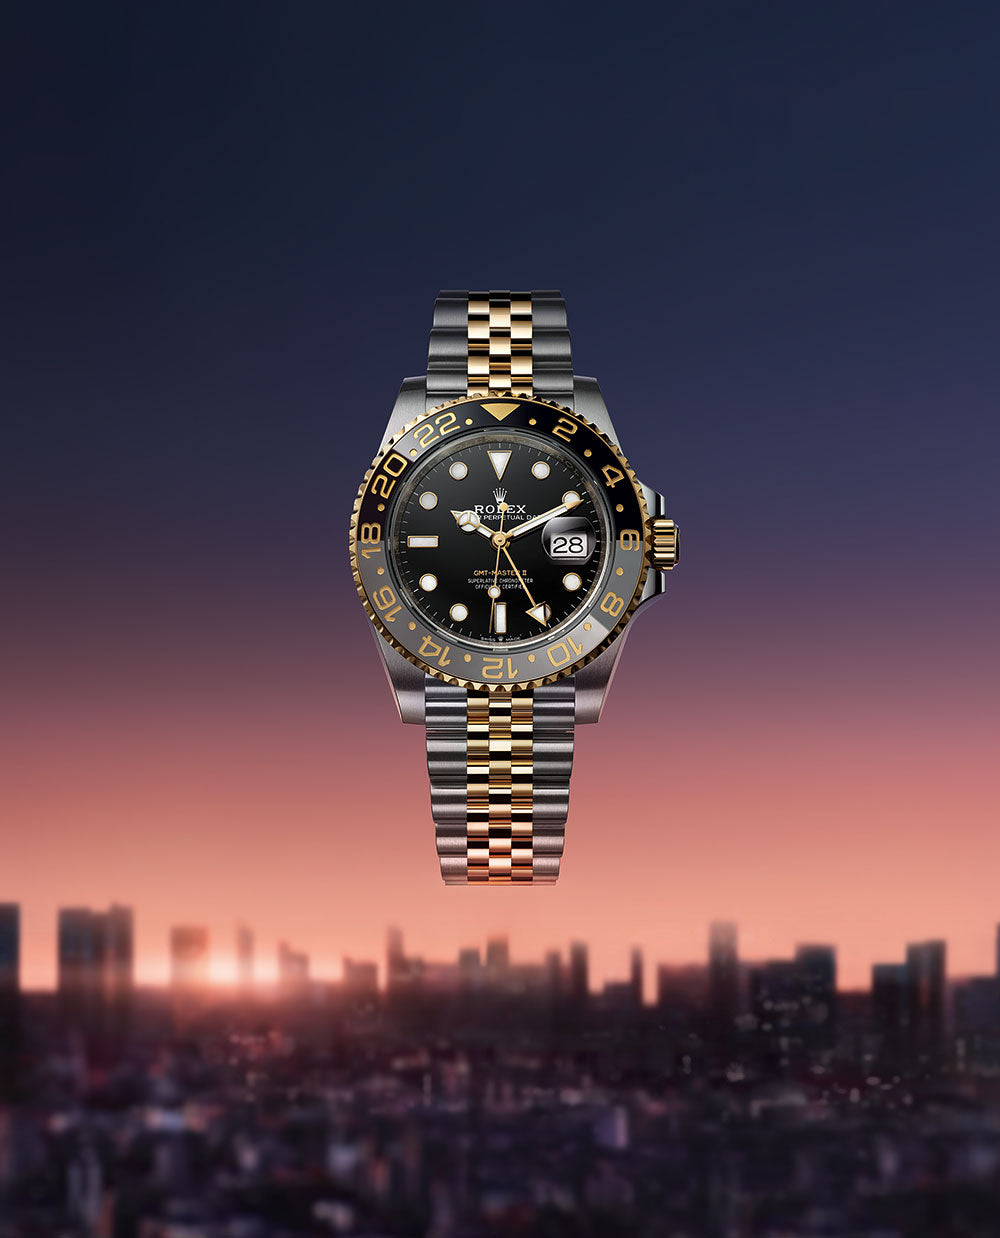 GMT-Master II with Black Lacquer Dial with City Skyline Background